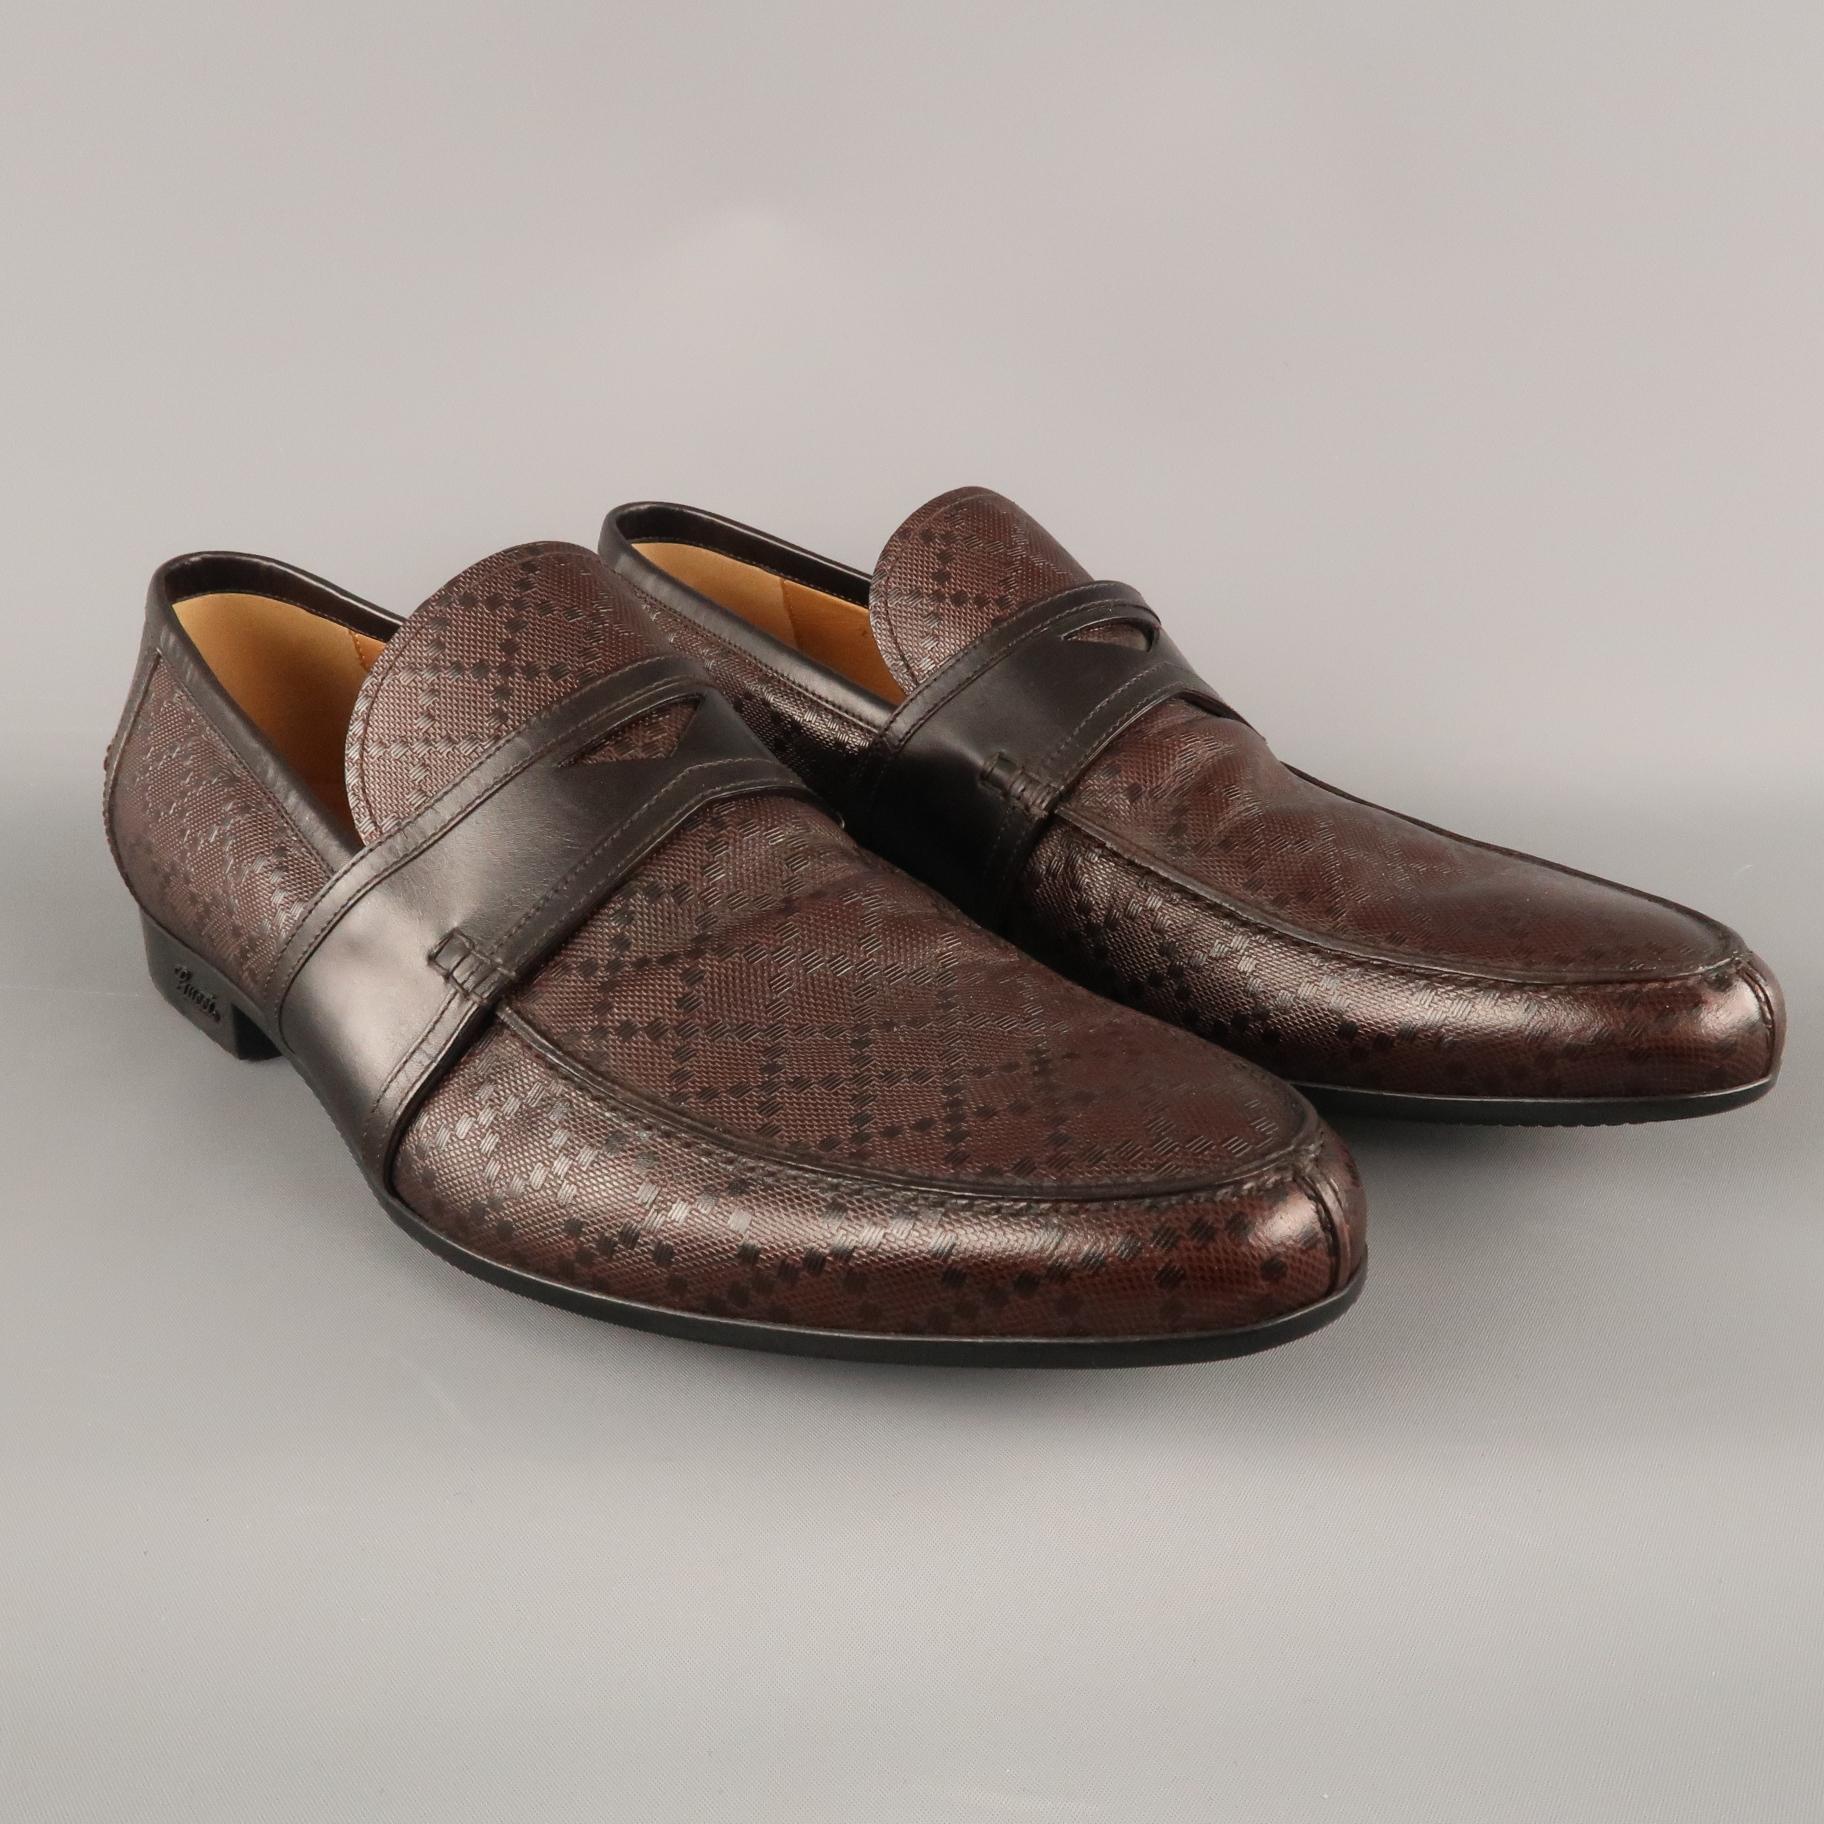 GUCCI Loafers Slip On Shoes comes in a brown tone in a textured leather material, with a pointed toe and a rubber outsole.  With Box. Made in Italy.

Excellent Pre-Owned Condition.
Marked: 245583 UK 12

Outsole: 13 x 4 in.